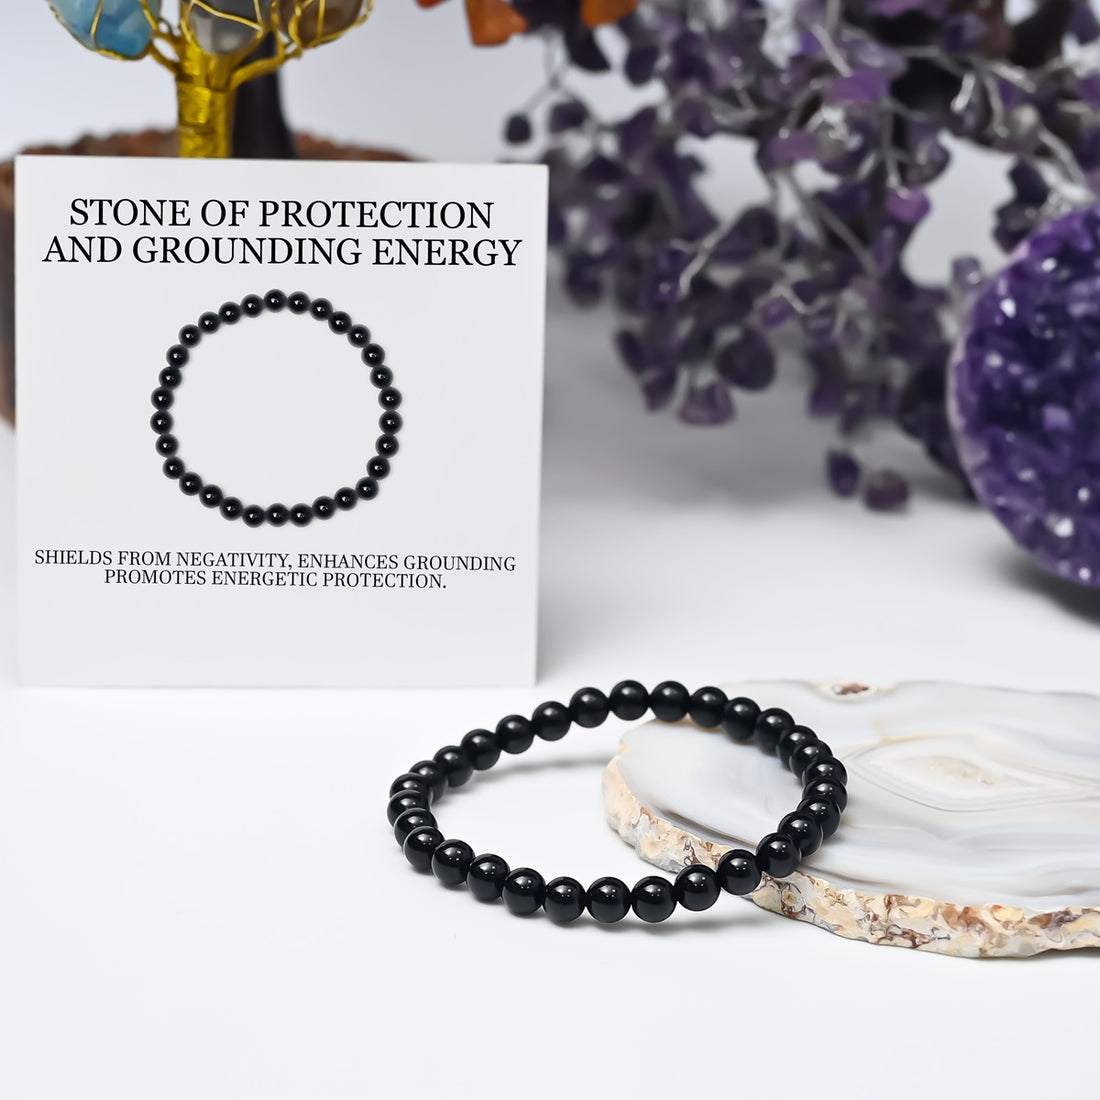 Symbolic image representing the protective qualities of Black Tourmaline, shielding against negativity, portrayed elegantly in the bracelet